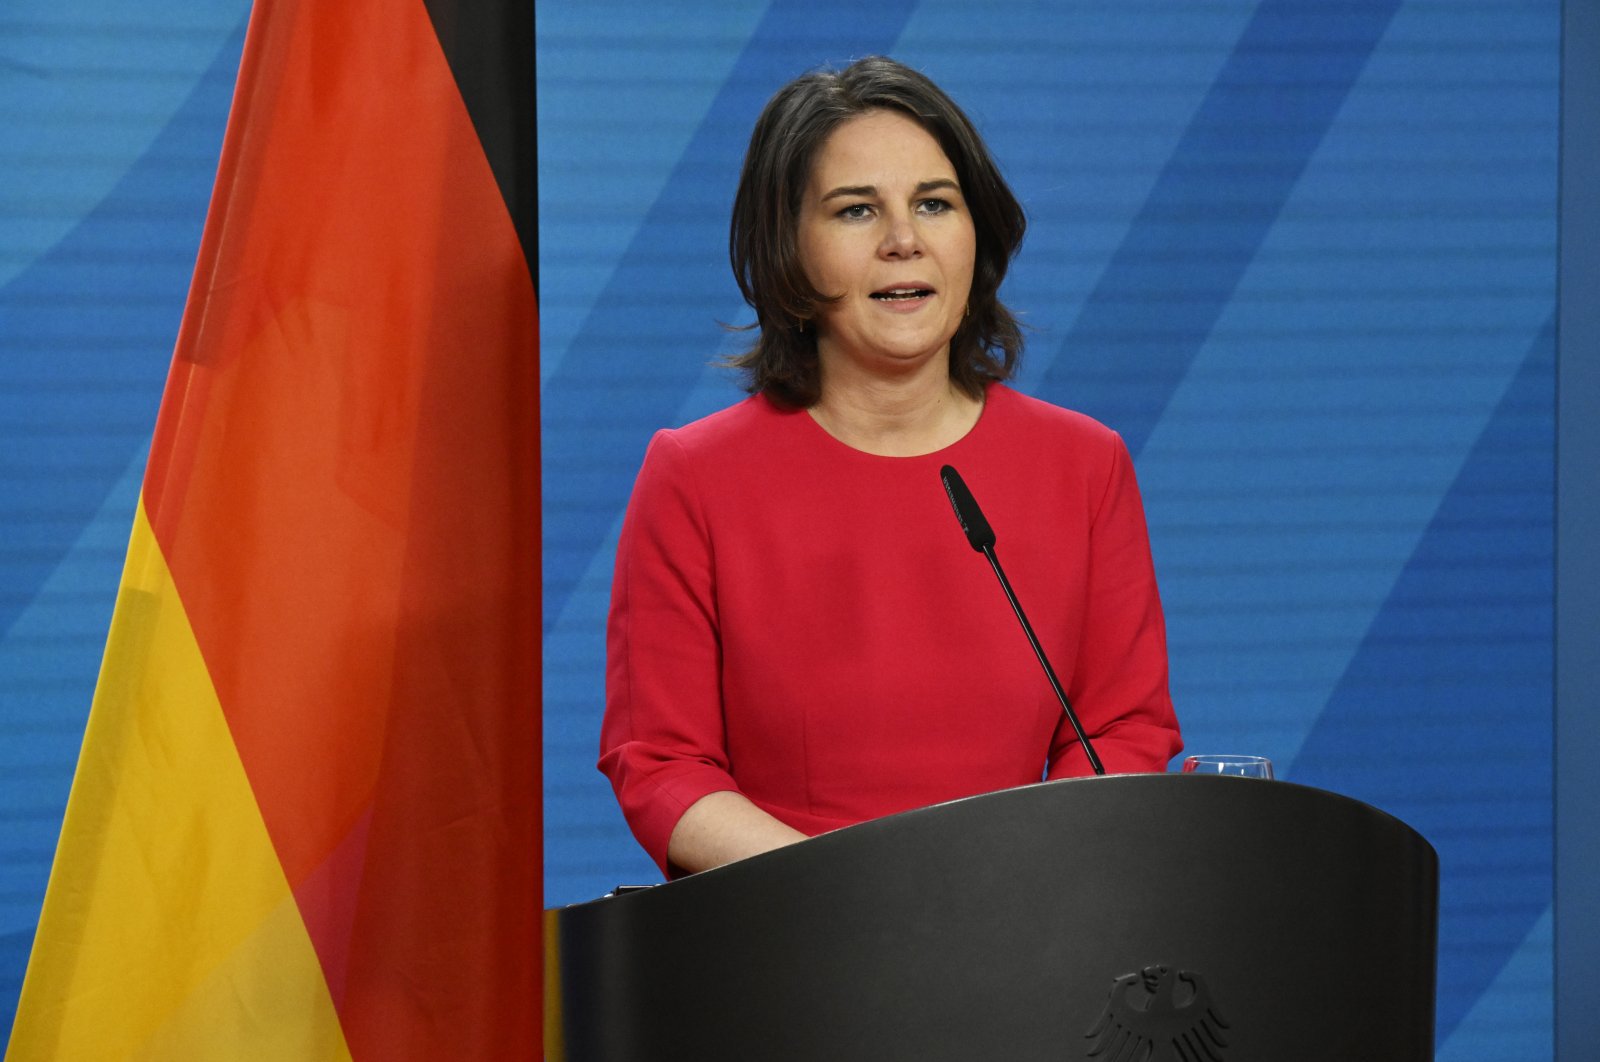 German Foreign Minister Annalena Baerbock speaks during a joint press statement with Singapore's Minister of Foreign Affairs Vivian Balakrishnan in the Foreign Office in Berlin, Germany, Monday April 4, 2022. (Tobias Schwarz/Pool via AP)